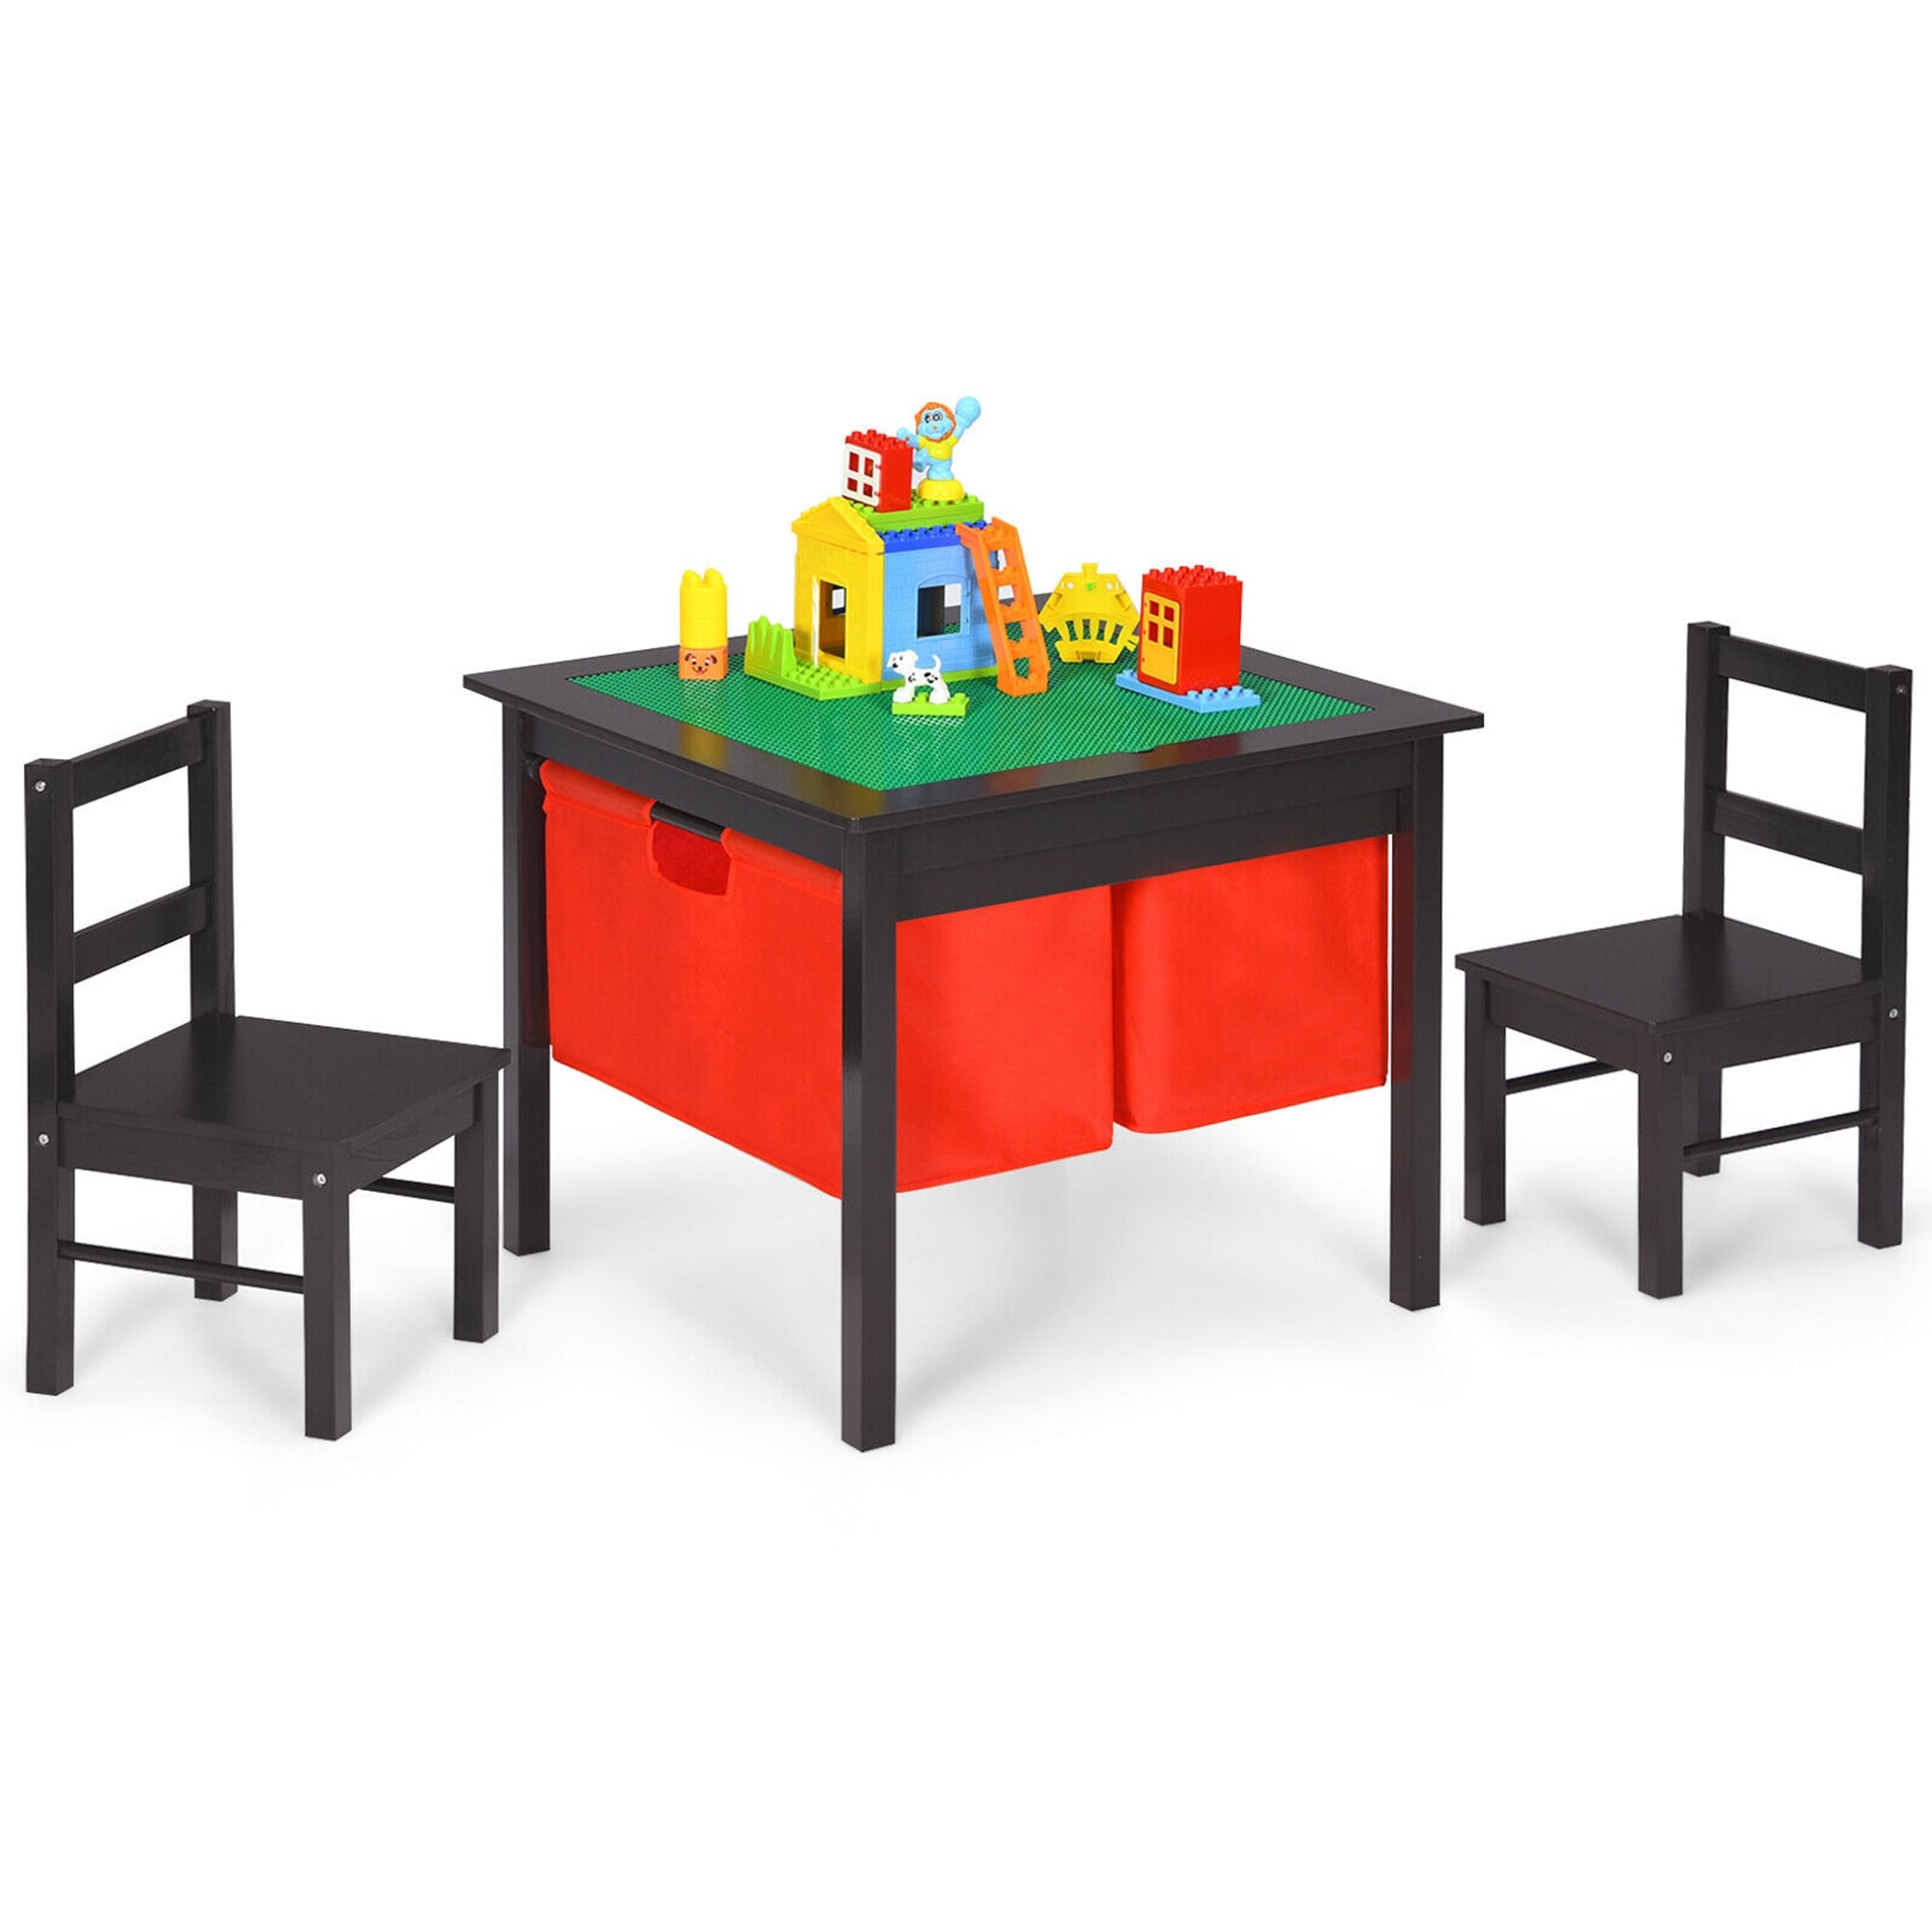 https://ak1.ostkcdn.com/images/products/is/images/direct/c629ccb09c8ad69928b19034e8d27a6584947c49/Gymax-2-in-1-Kids-Activity-Table-%26-2-Chairs-Set-w-Storage-Building.jpg